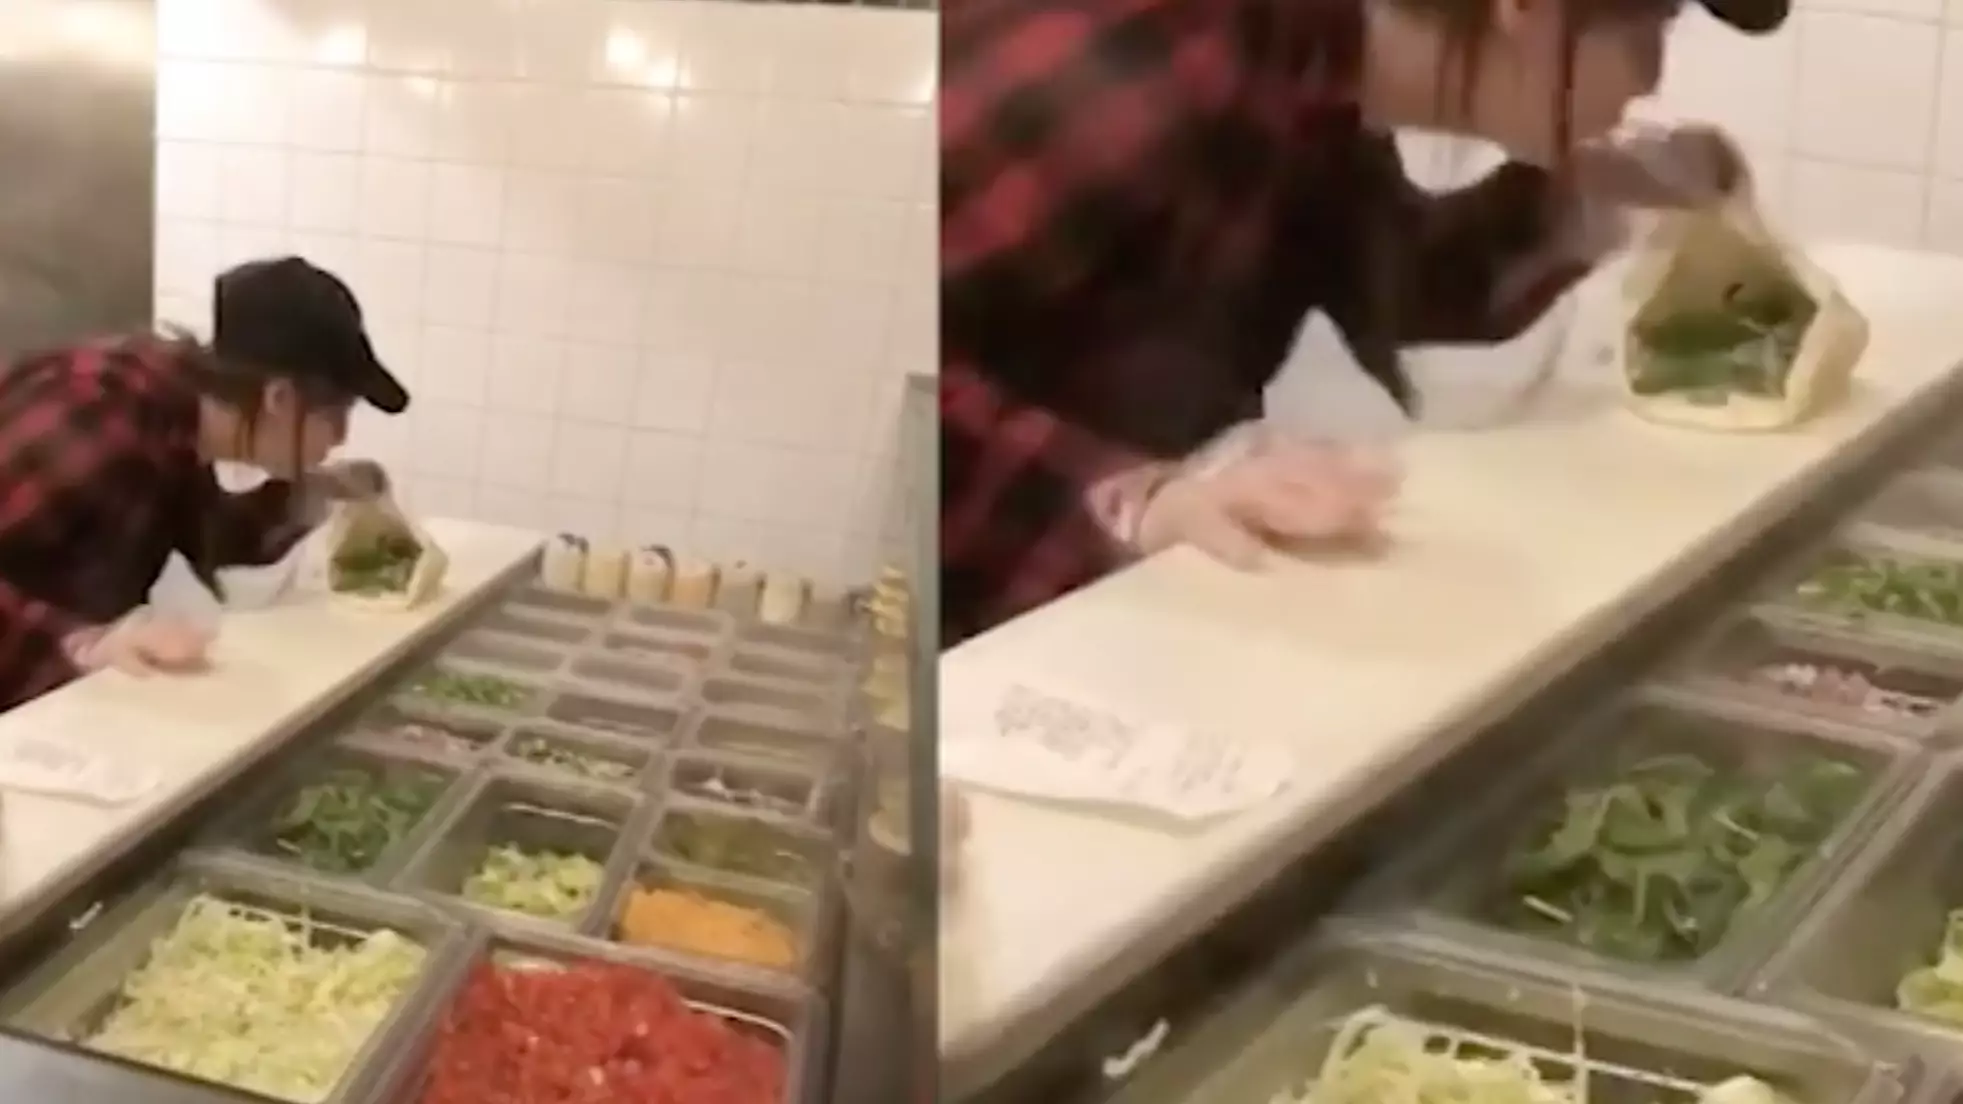 Pita Pit Worker Filmed Spitting In Woman's Food